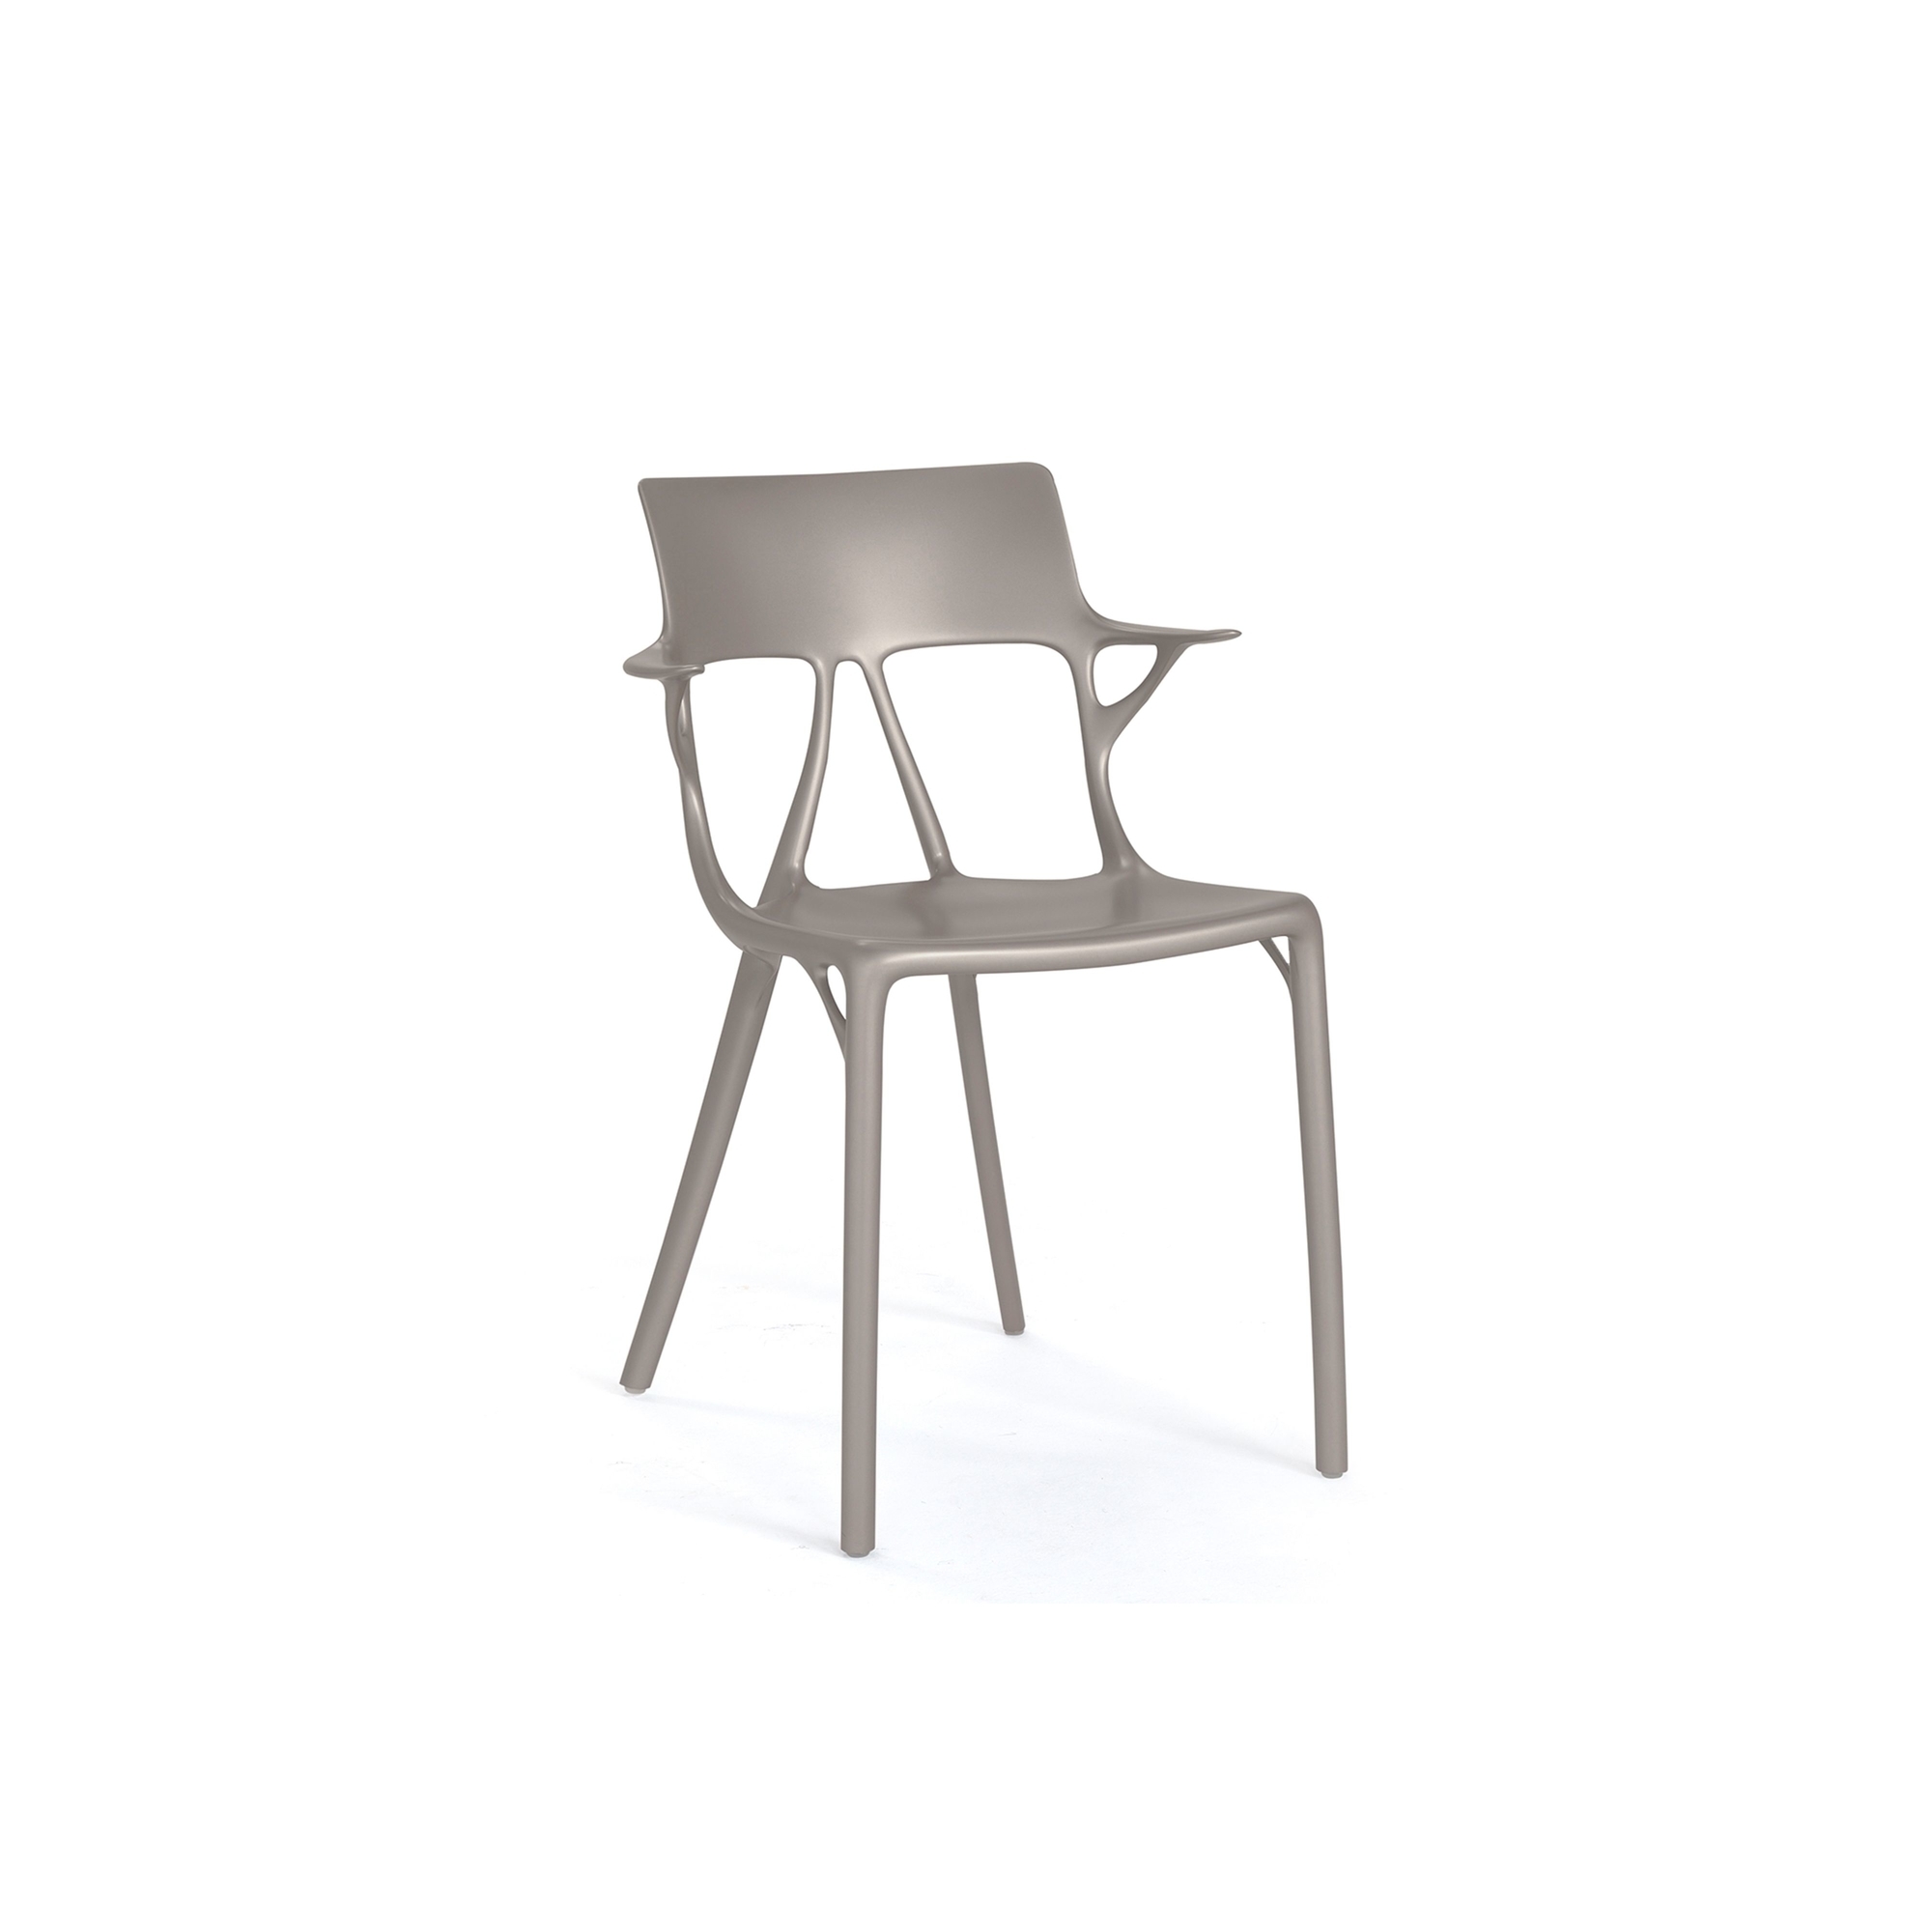 First created chair from artificial intelligence - Kartell 